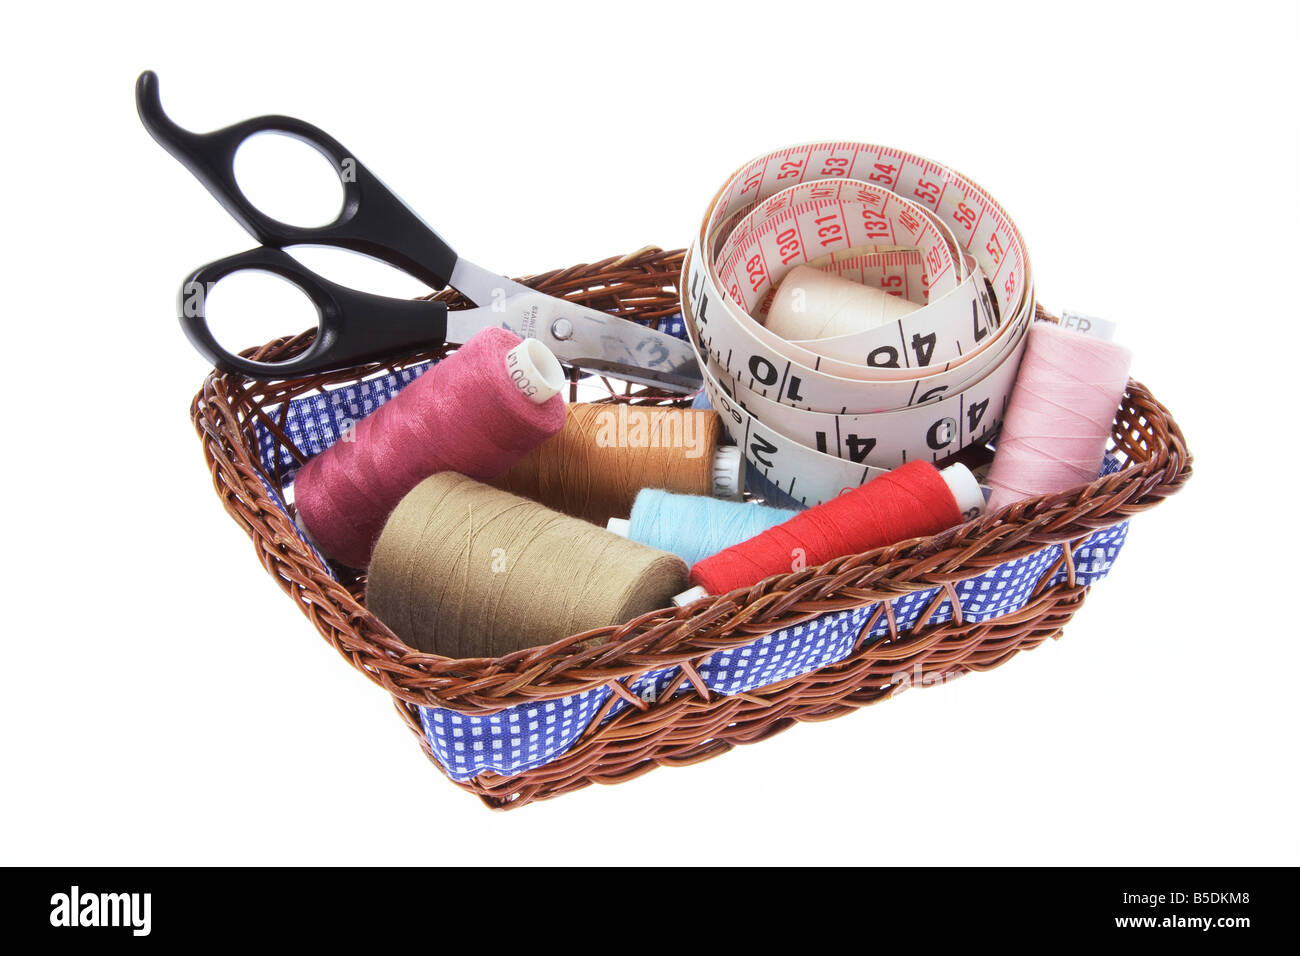 Sewing Accesories in Basket Stock Photo